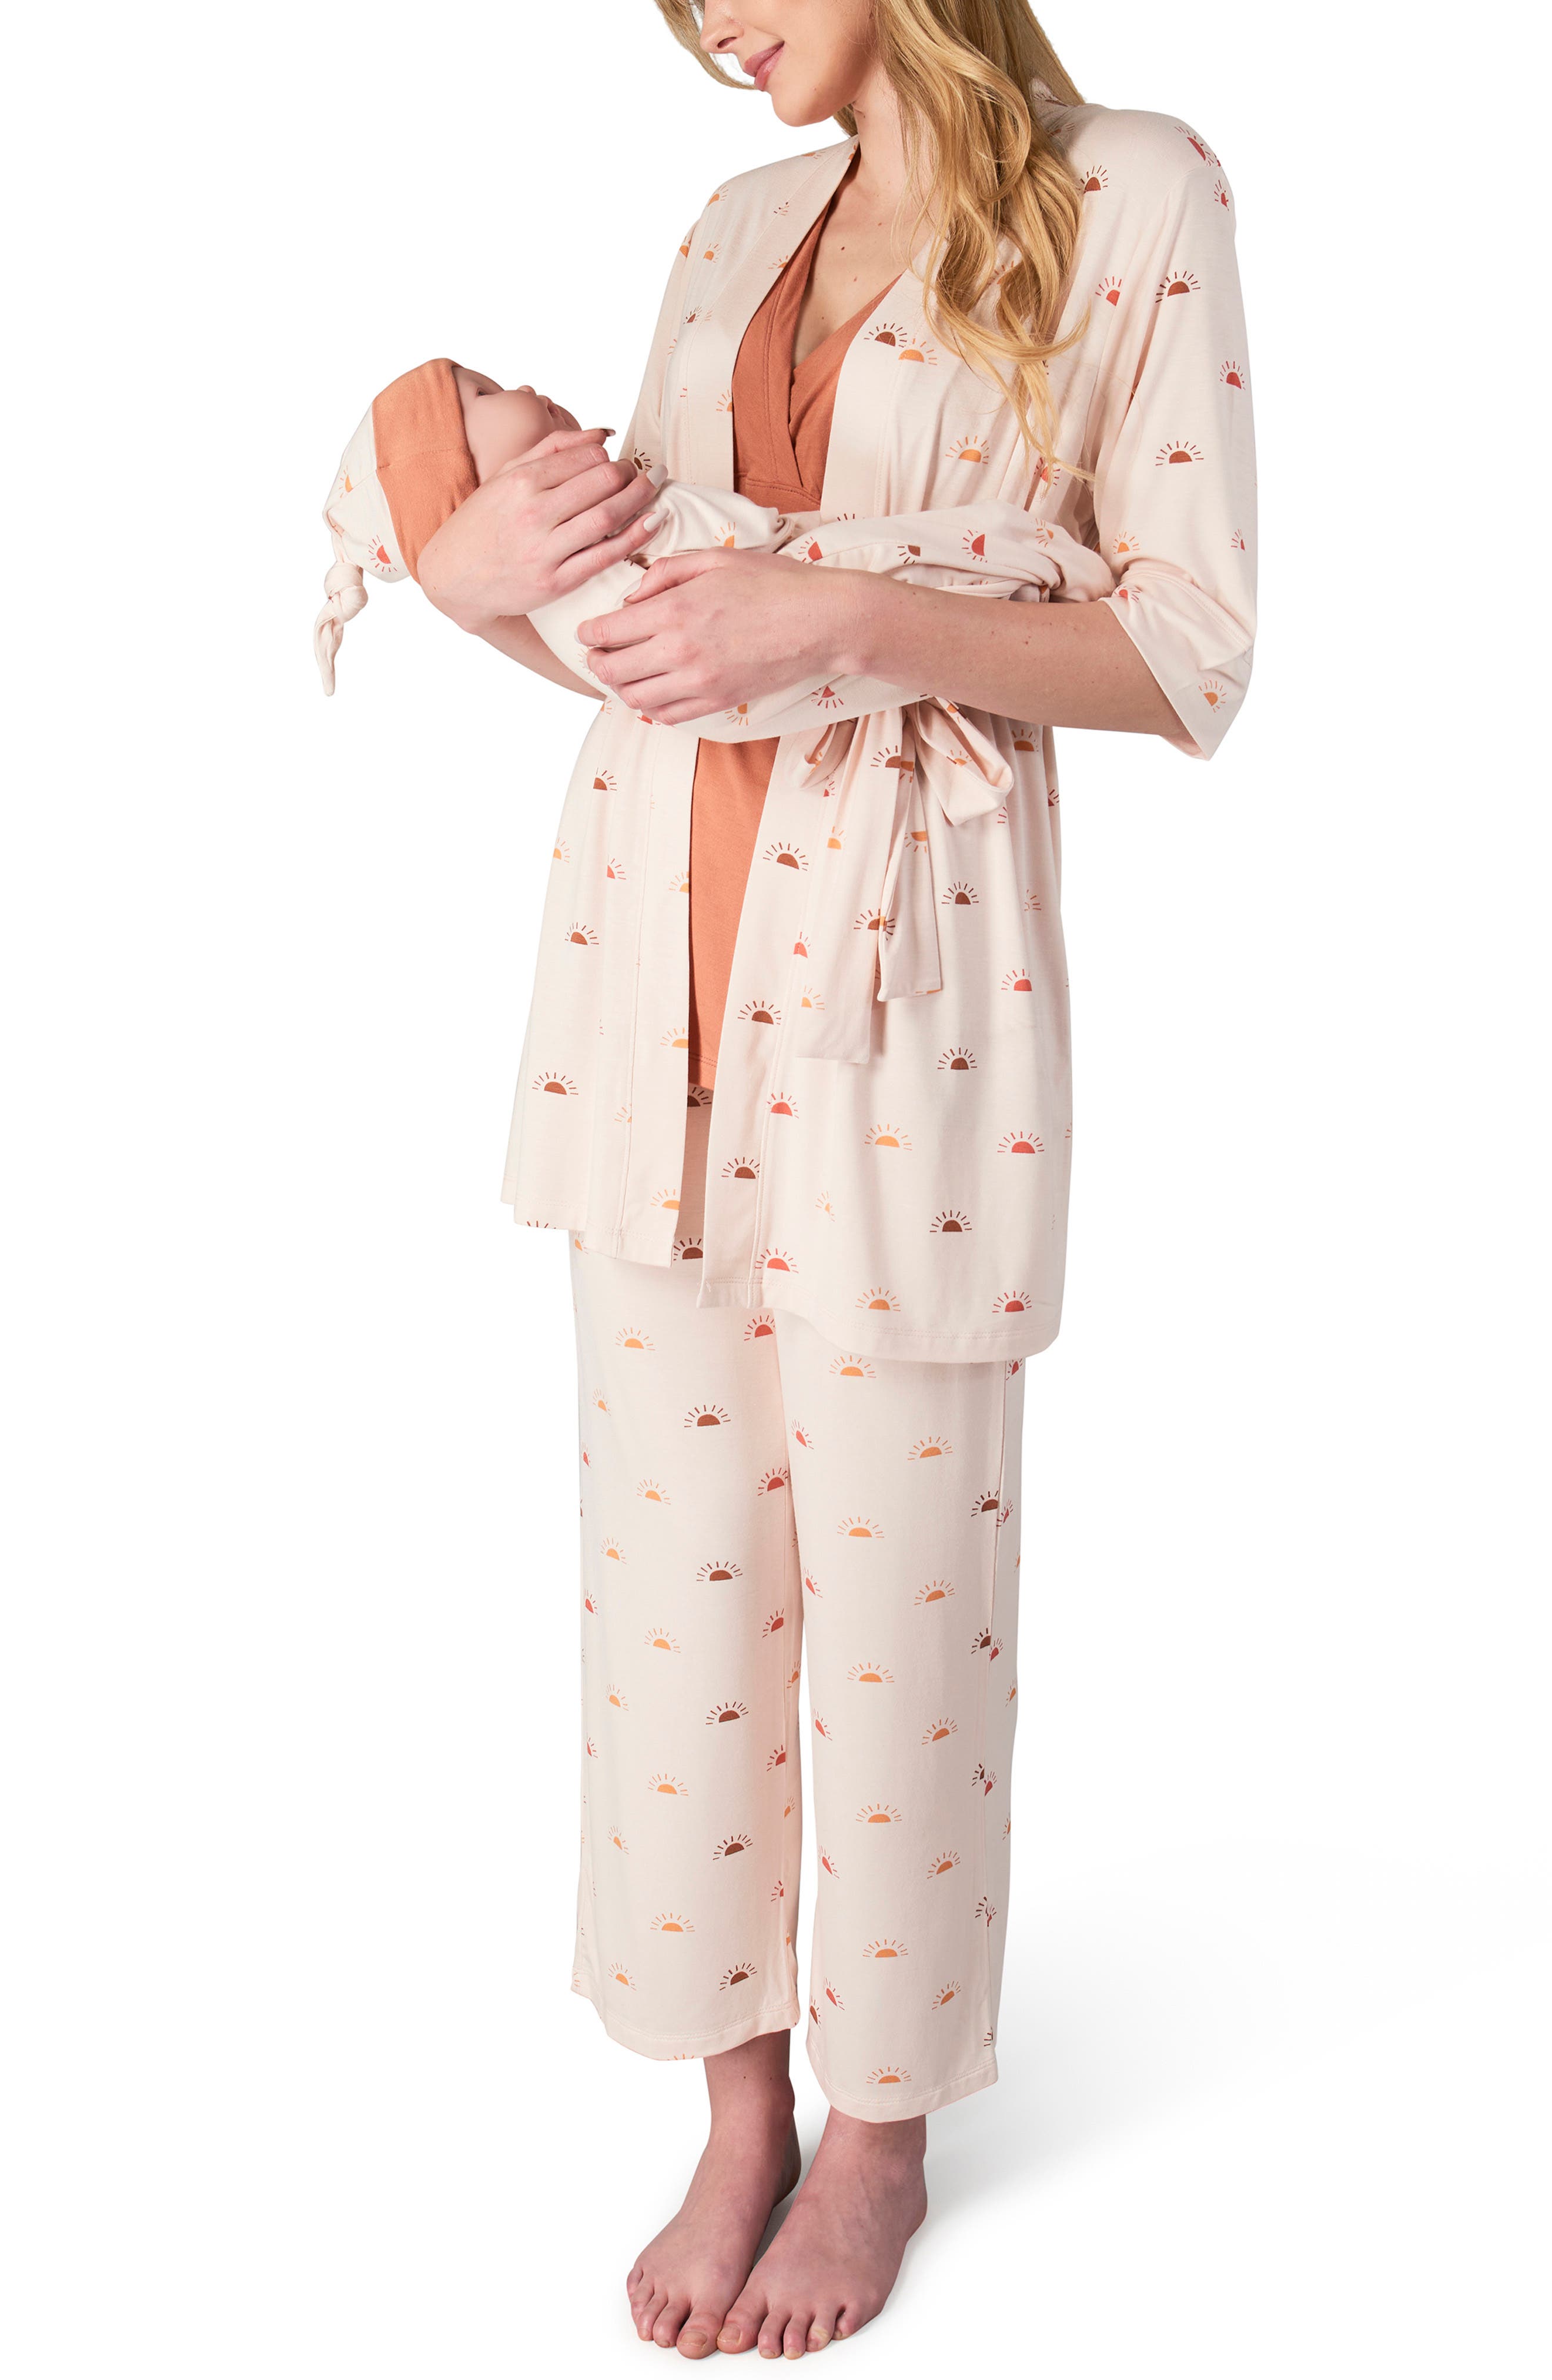 5 Piece Maternity and Nursing PJ Pant Set for Mom and Baby 